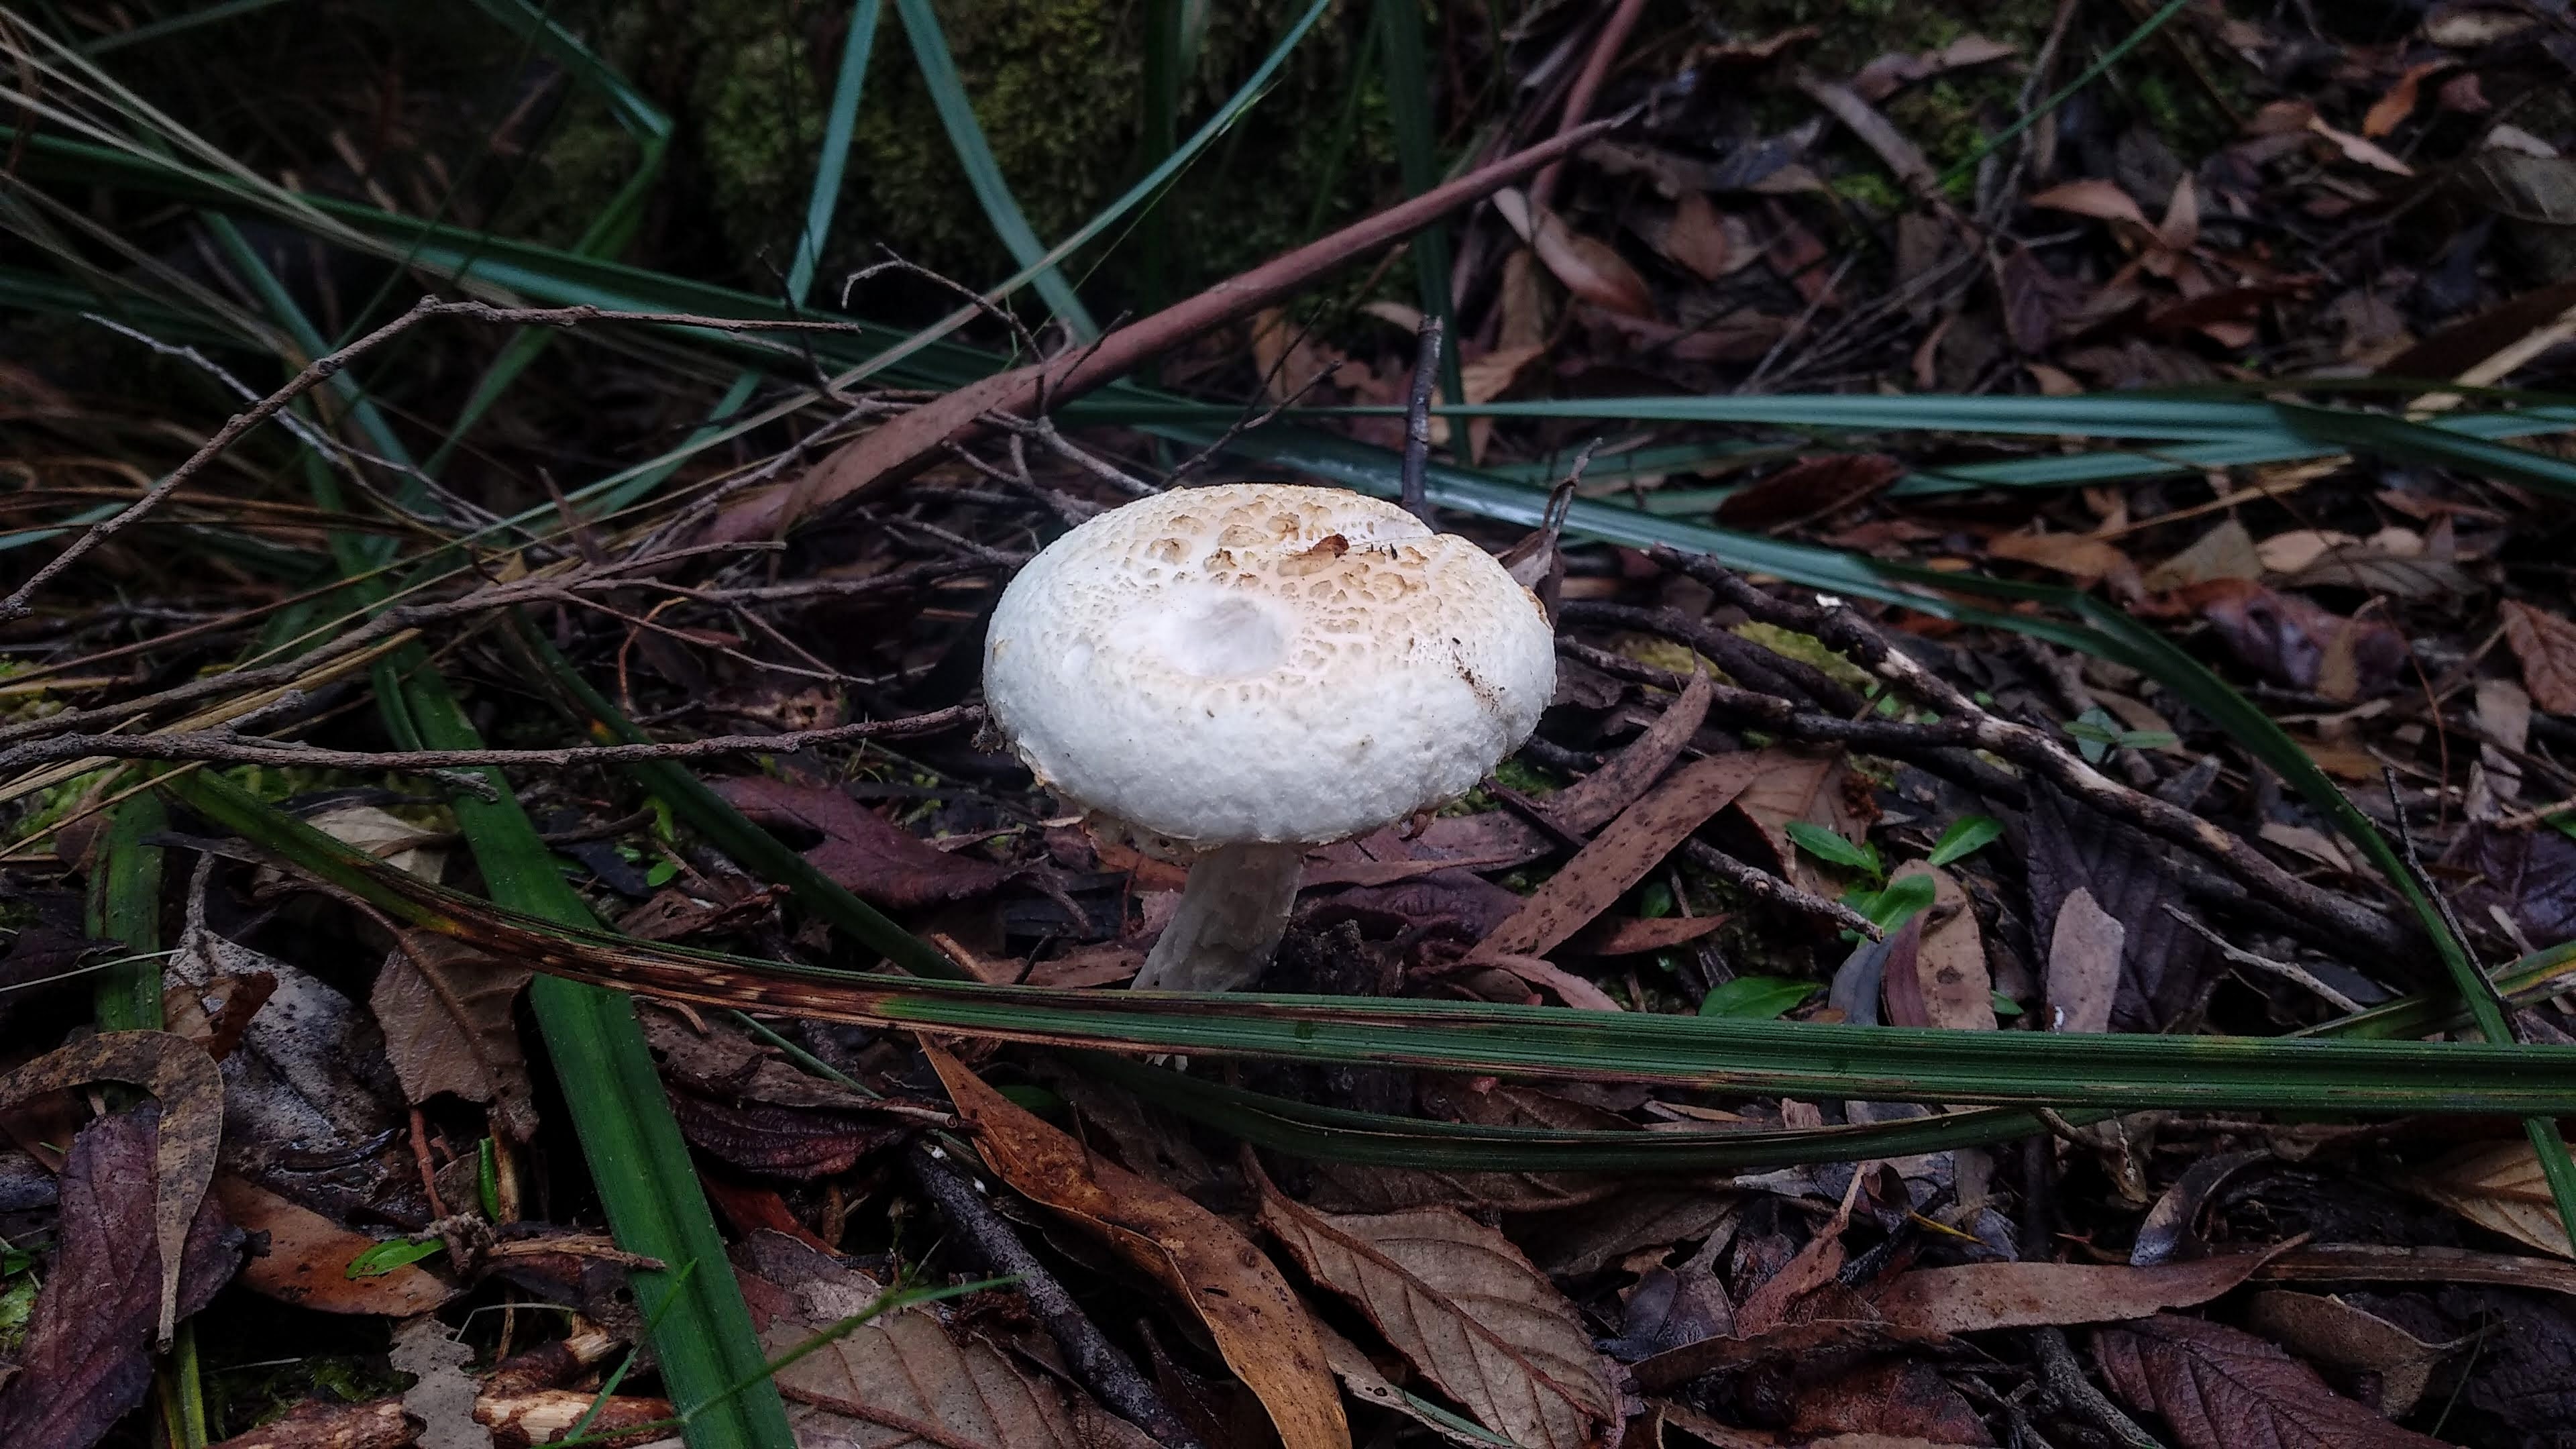 A fungus yet to be identified